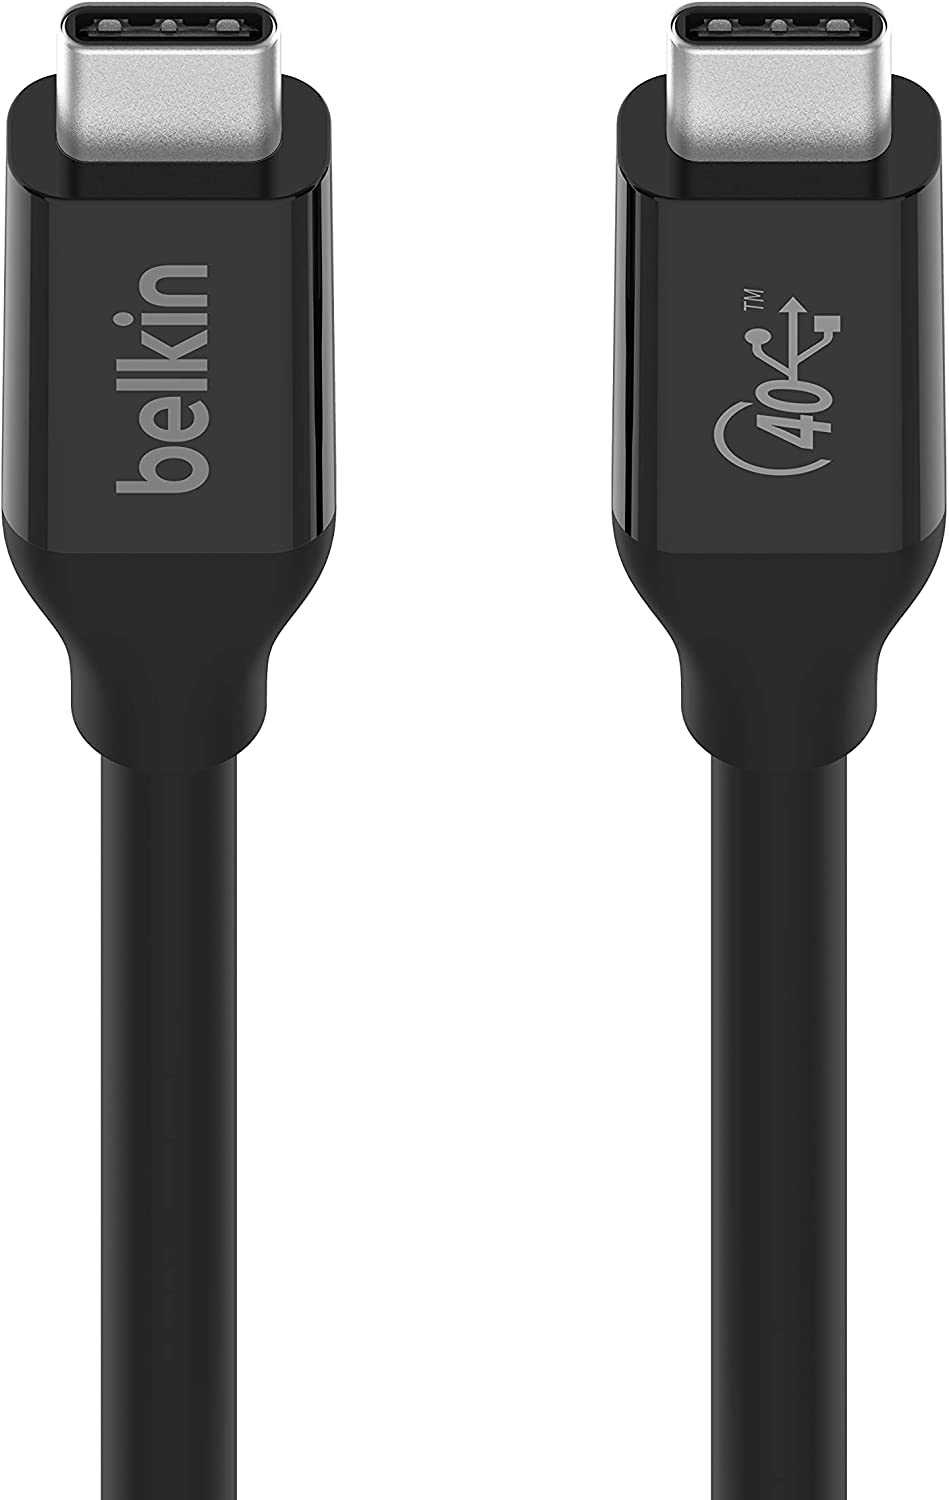 Belkin USB 4.0 Cable (USB-C To USB-C) - Black (INZ001BT0.8MBK) - Maximum performance from a single USB C cable, up to 40 Gbps